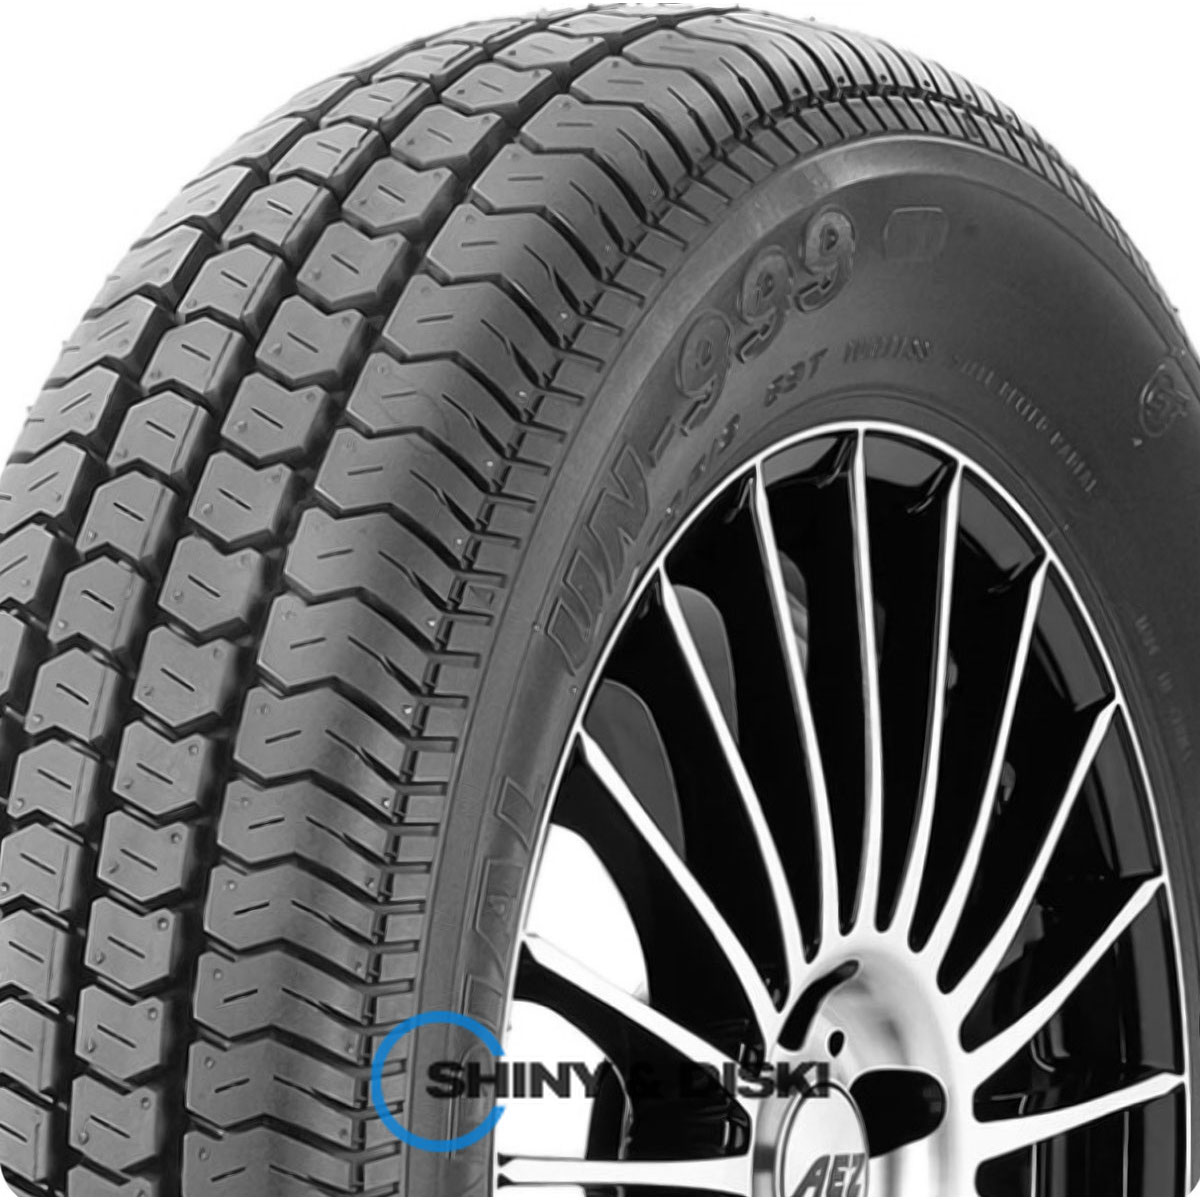 гума maxxis un-999 155/80 r12 77t